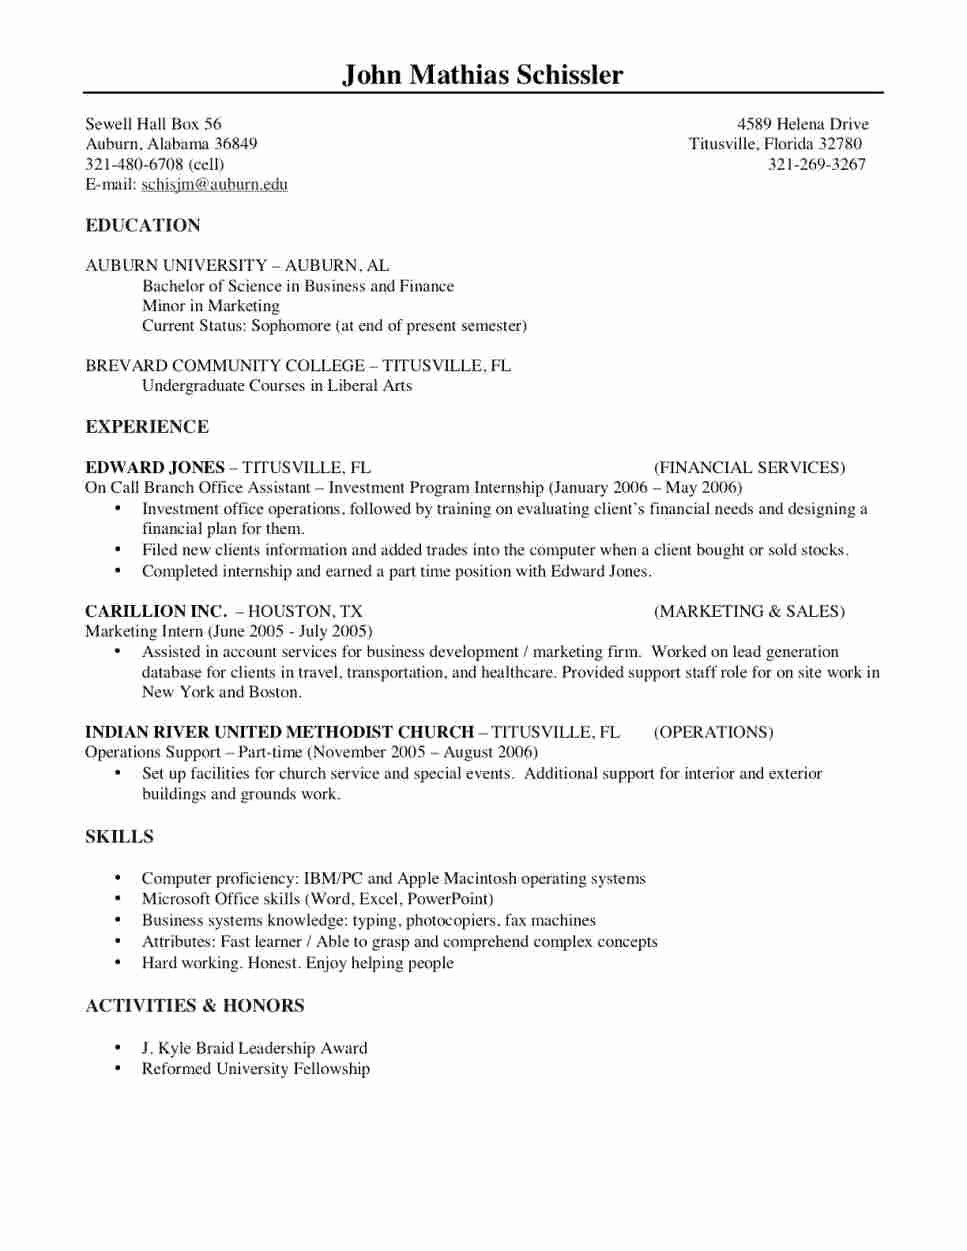 Copy and Paste Cover Letter Free